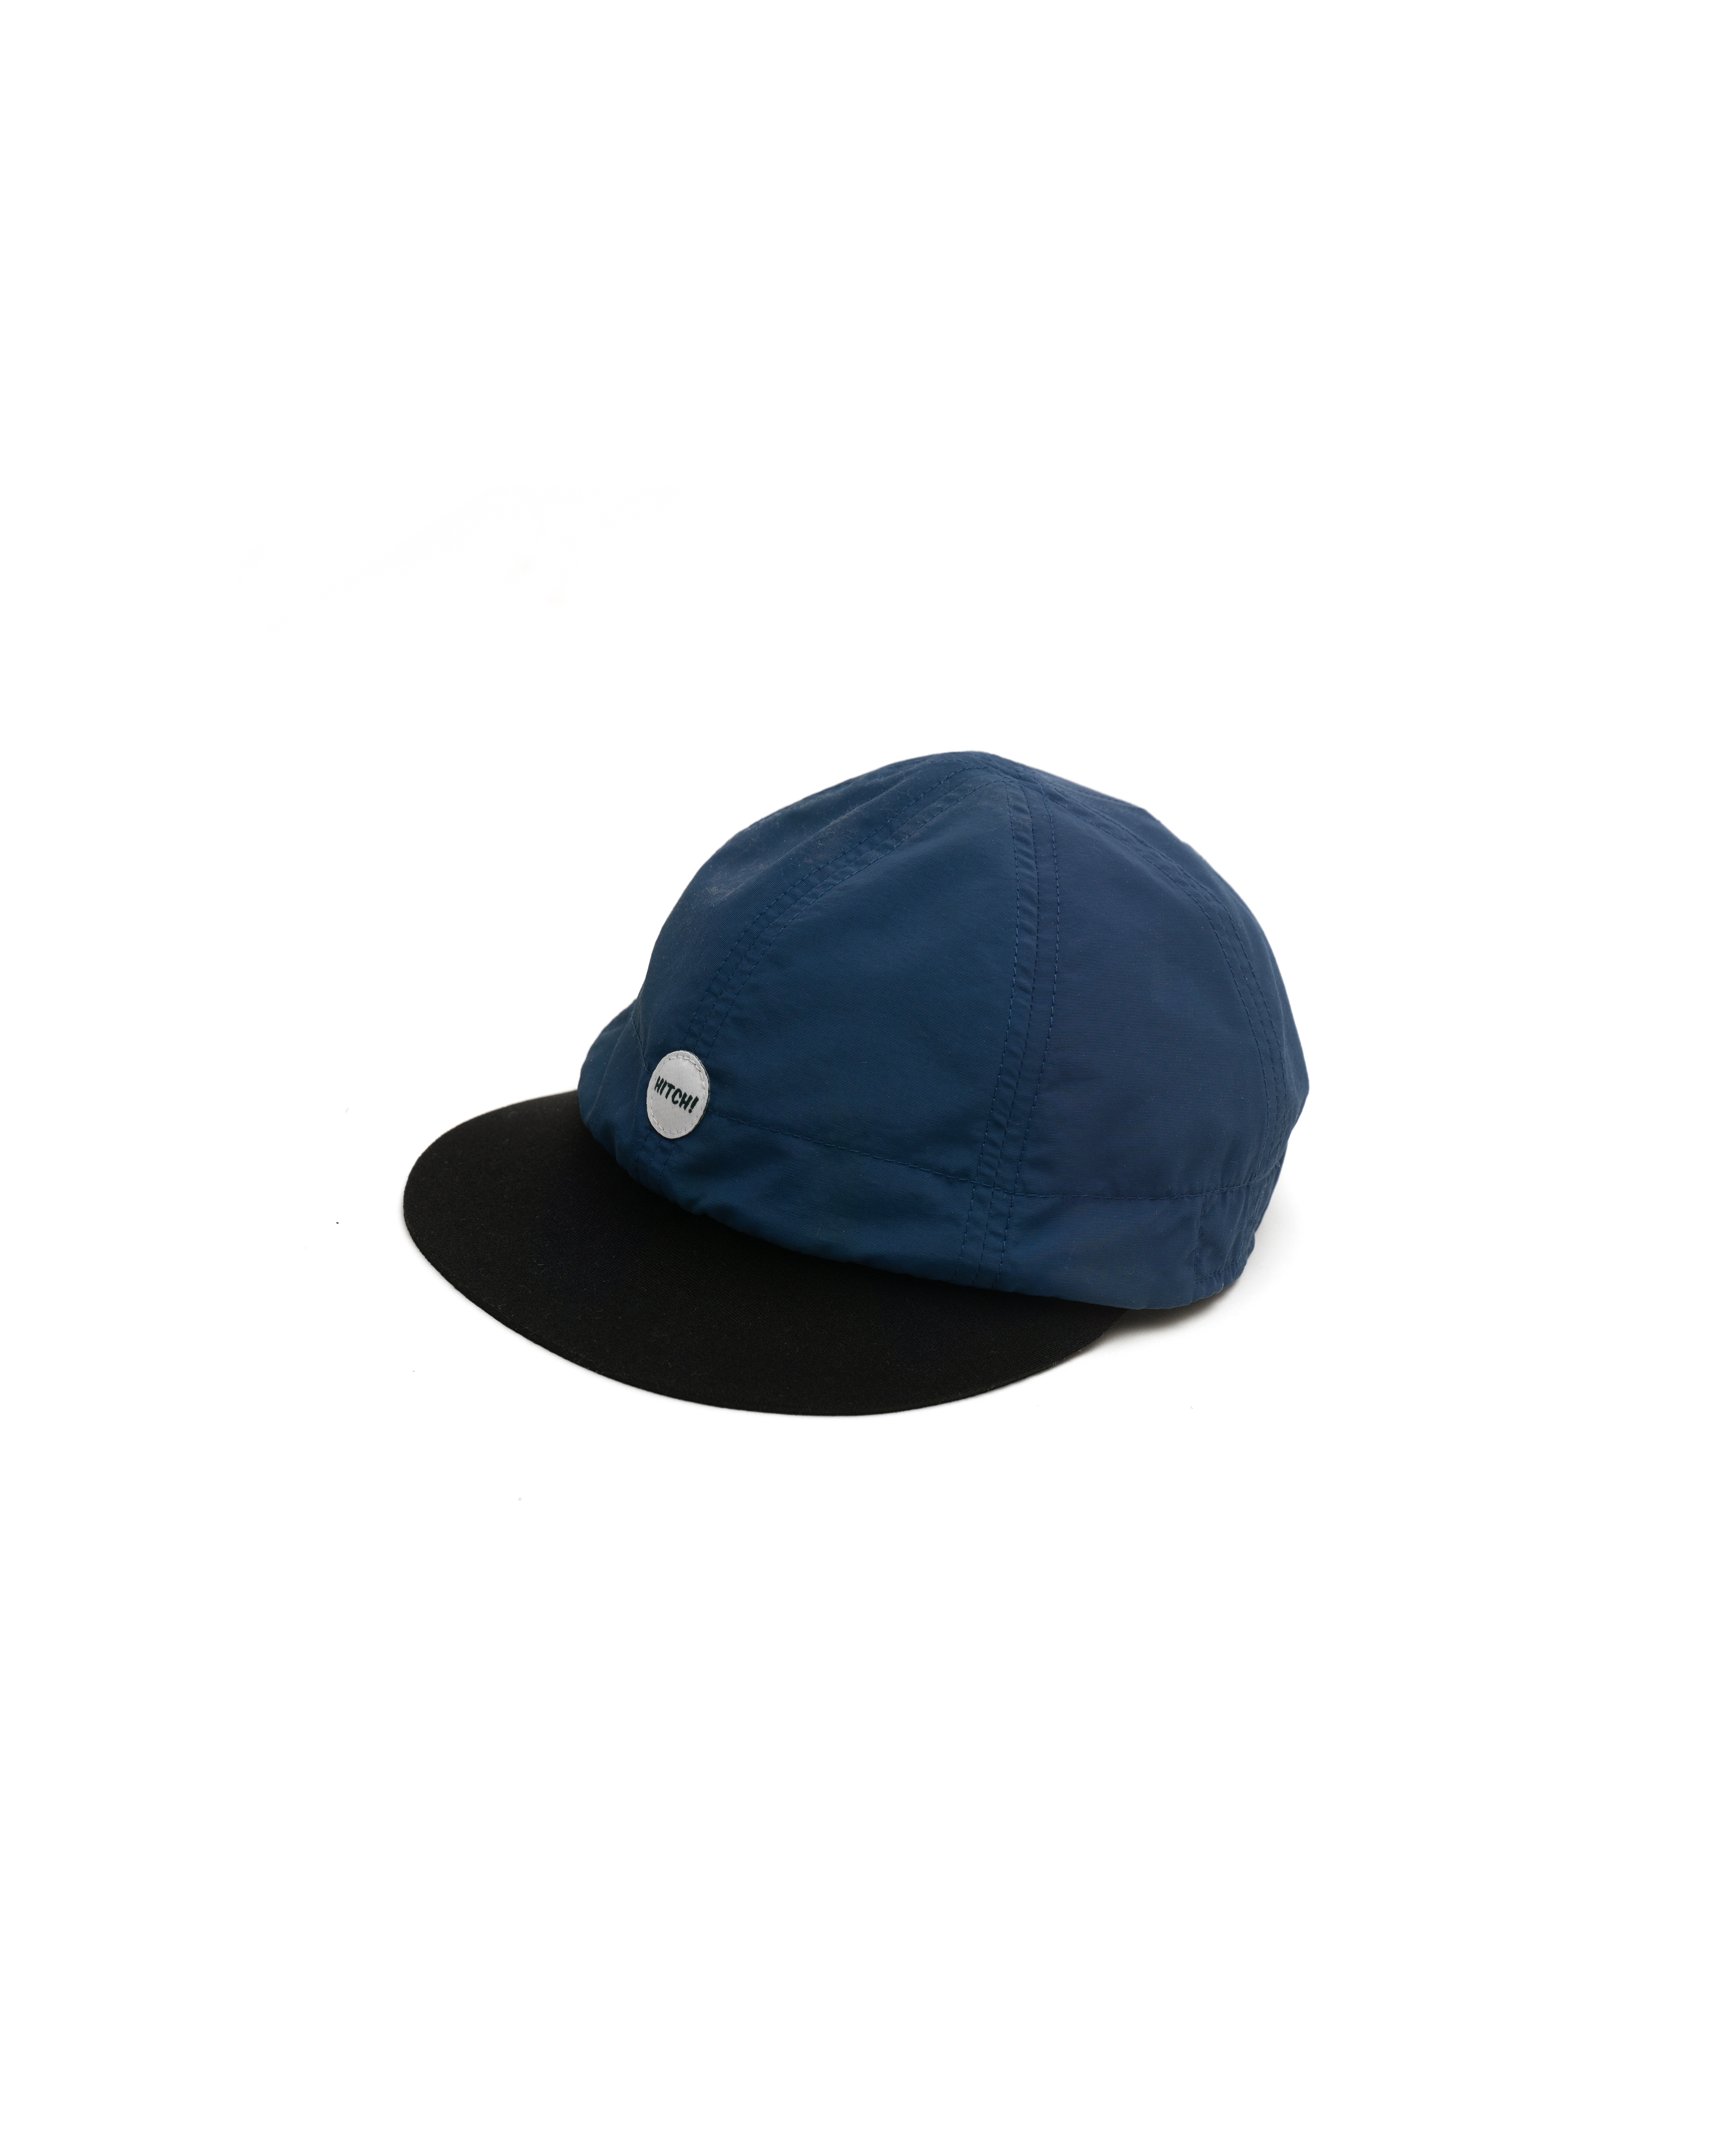 [out of stock] Kayak - Blue